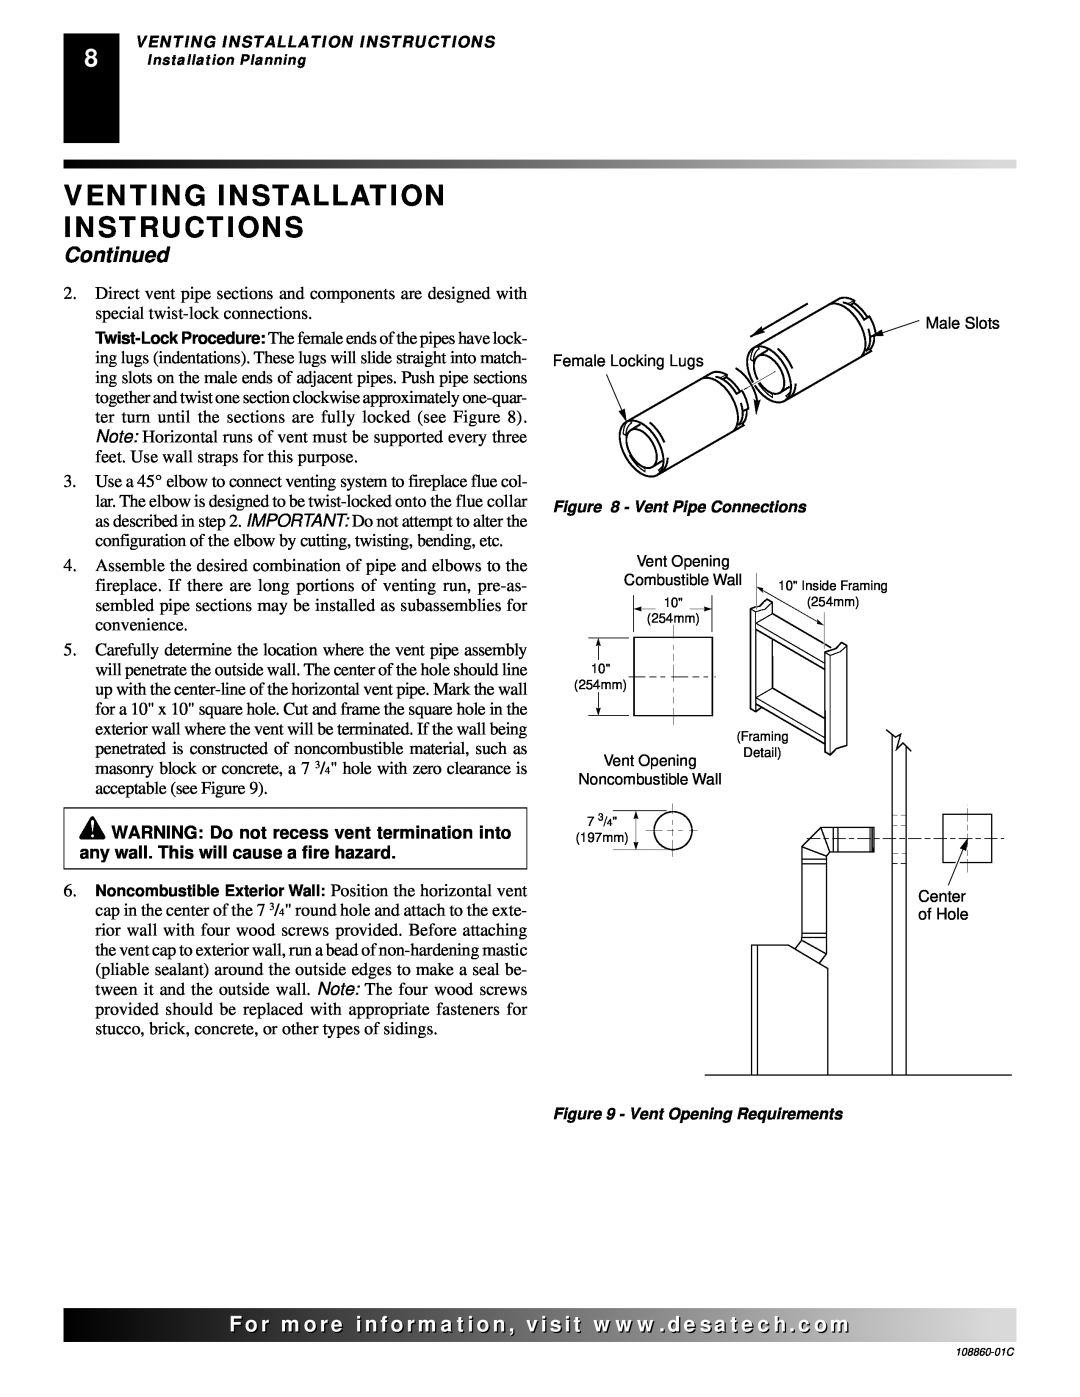 Desa (V)T36EP Venting Installation Instructions, Continued, Male Slots Female Locking Lugs, Vent Pipe Connections, Center 